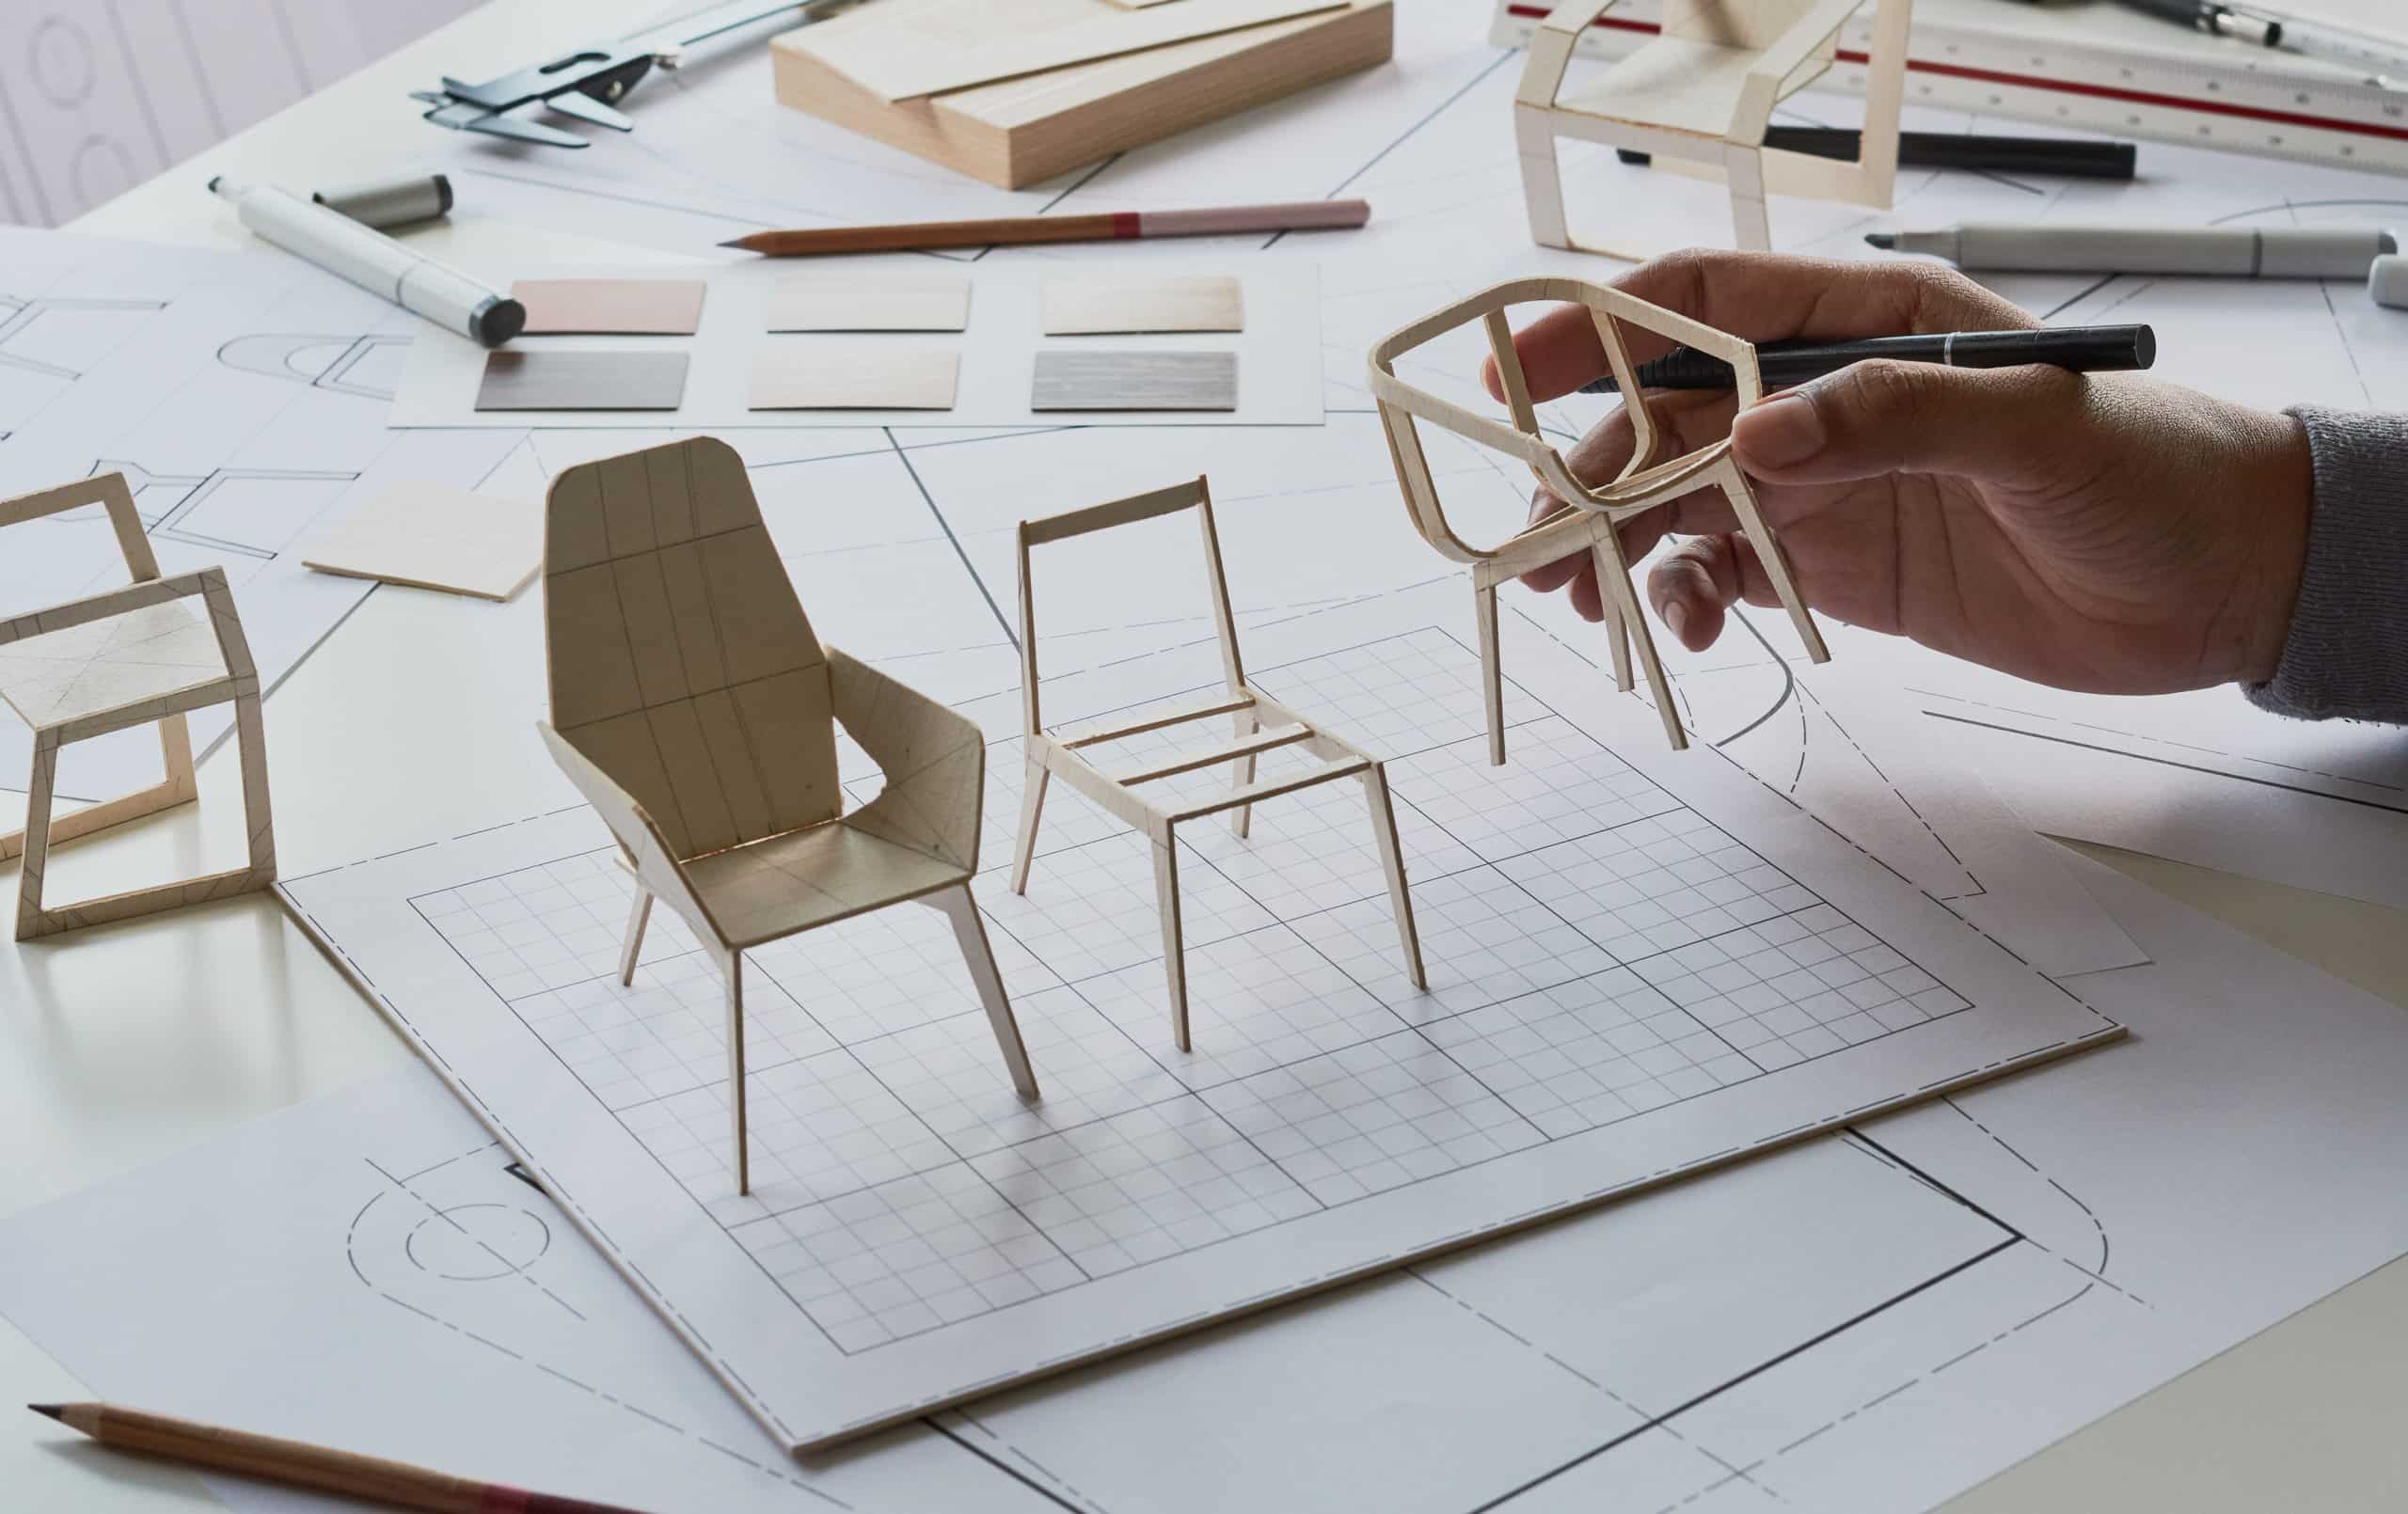 Designer reviewing prototypes of chair designs